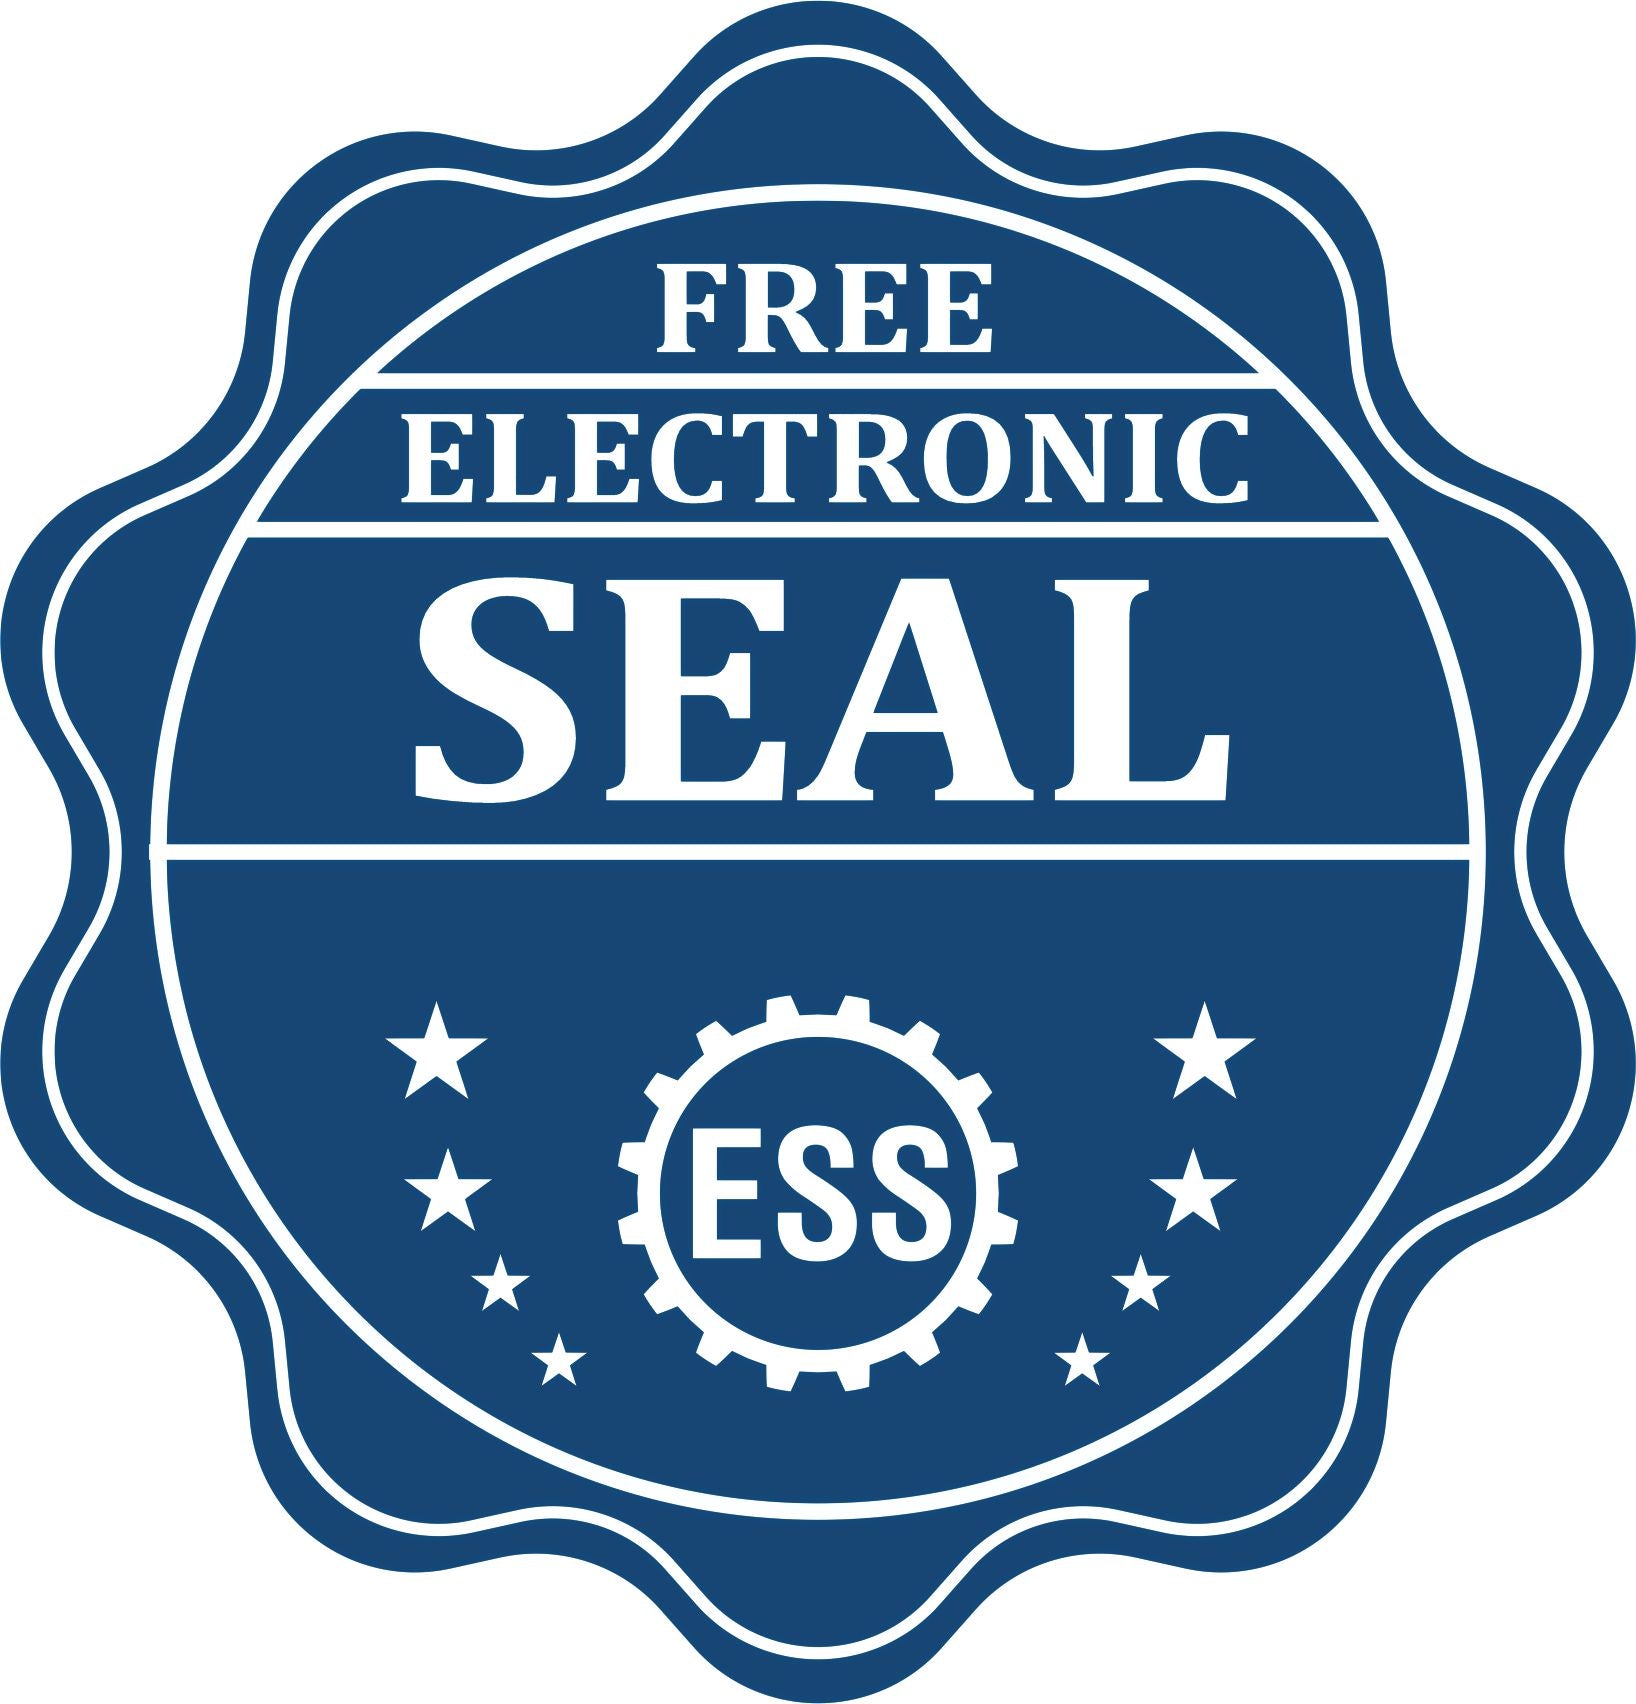 A badge showing a free electronic seal for the Premium MaxLight Pre-Inked Florida Geology Stamp with stars and the ESS gear on the emblem.